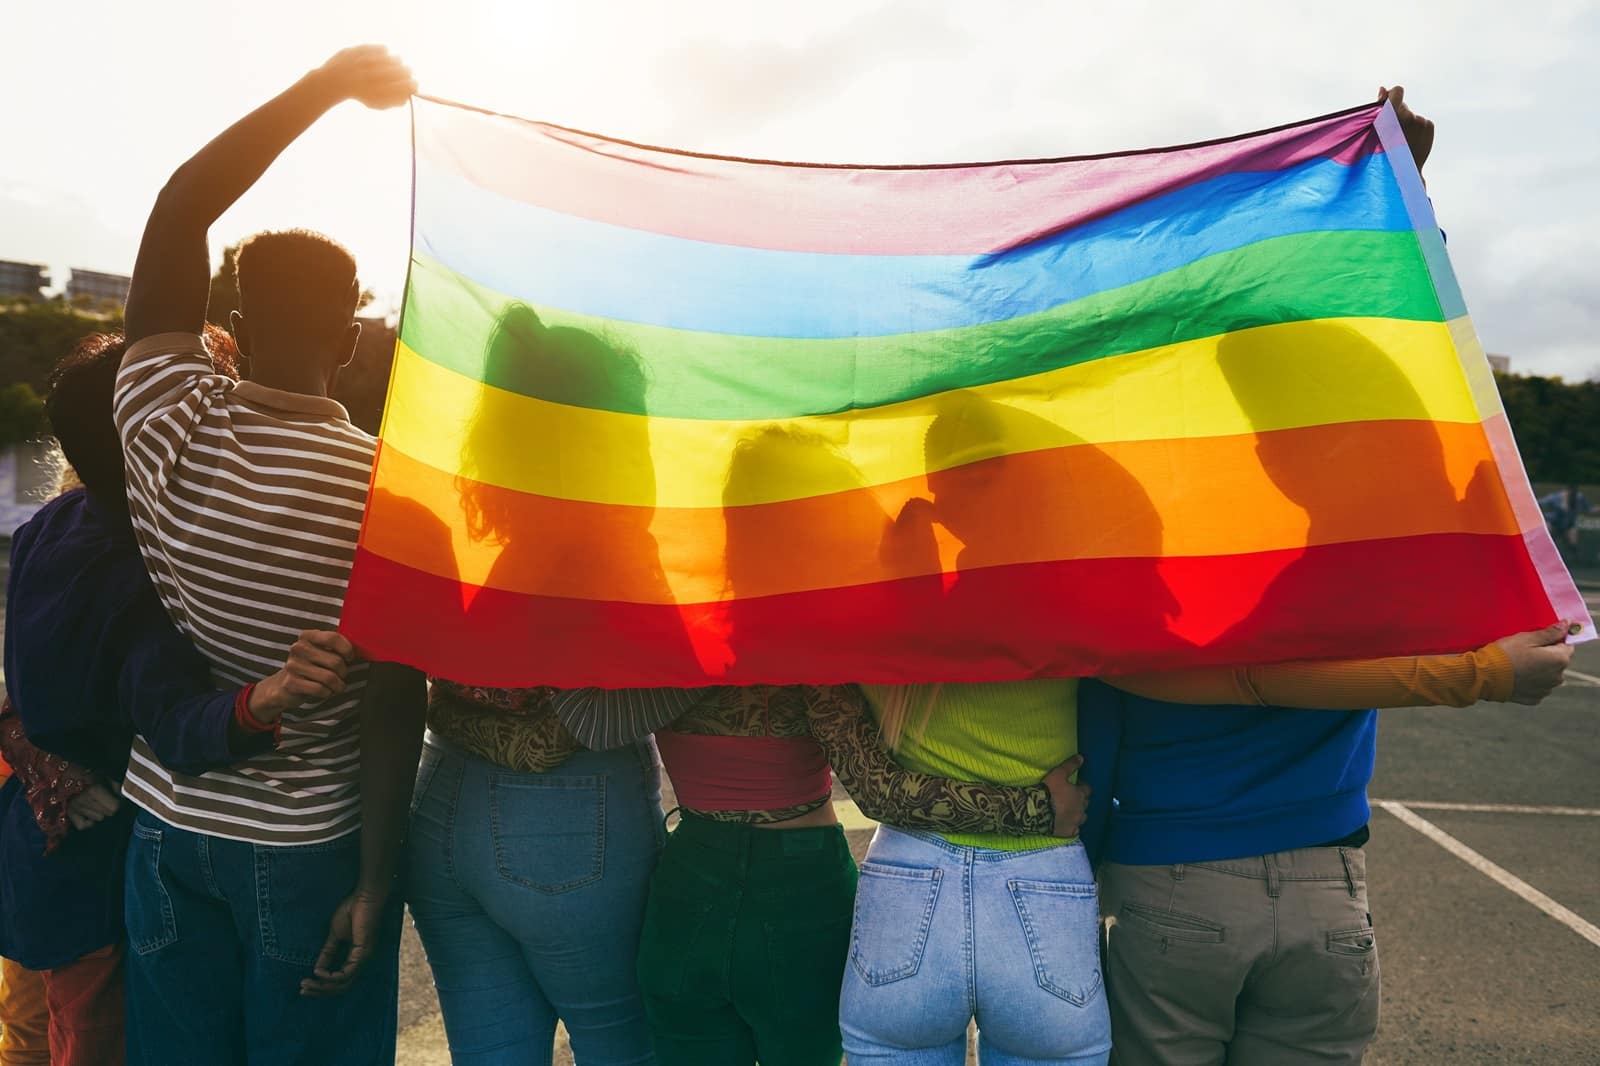 Image Credit: Shutterstock / Tint Media <p><span>Prominent figures in activism, spanning the gamut of causes from LGBTQ+ rights to more traditionally conservative causes like hunting, have expressed dismay over the government’s intentions. </span></p>